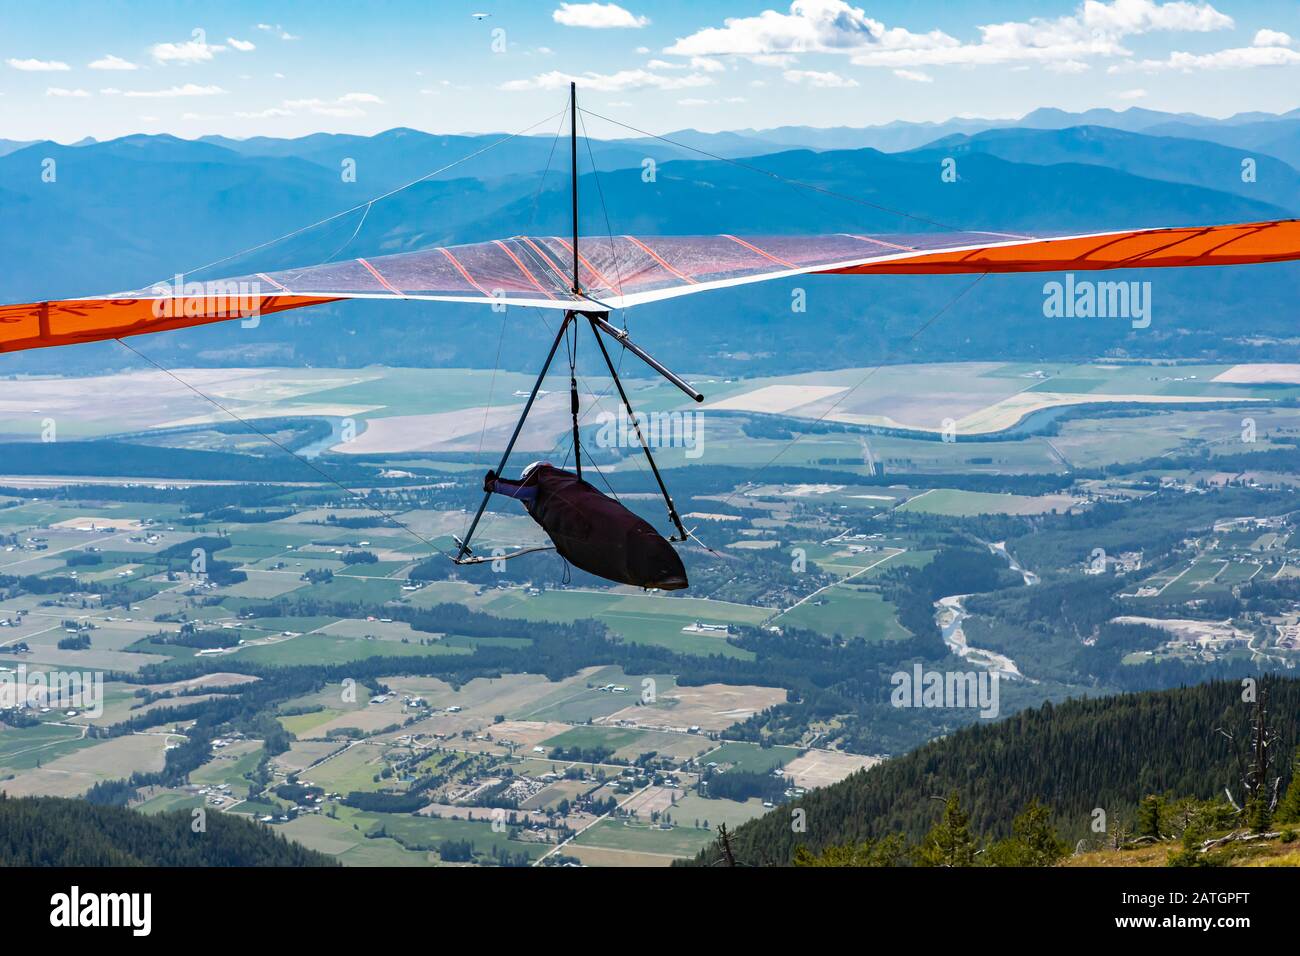 Hang glider in soaring flight off. Recreational extreme air sport for brave hobbyists. Flight over Kootenay valley mountains, Canada Stock Photo